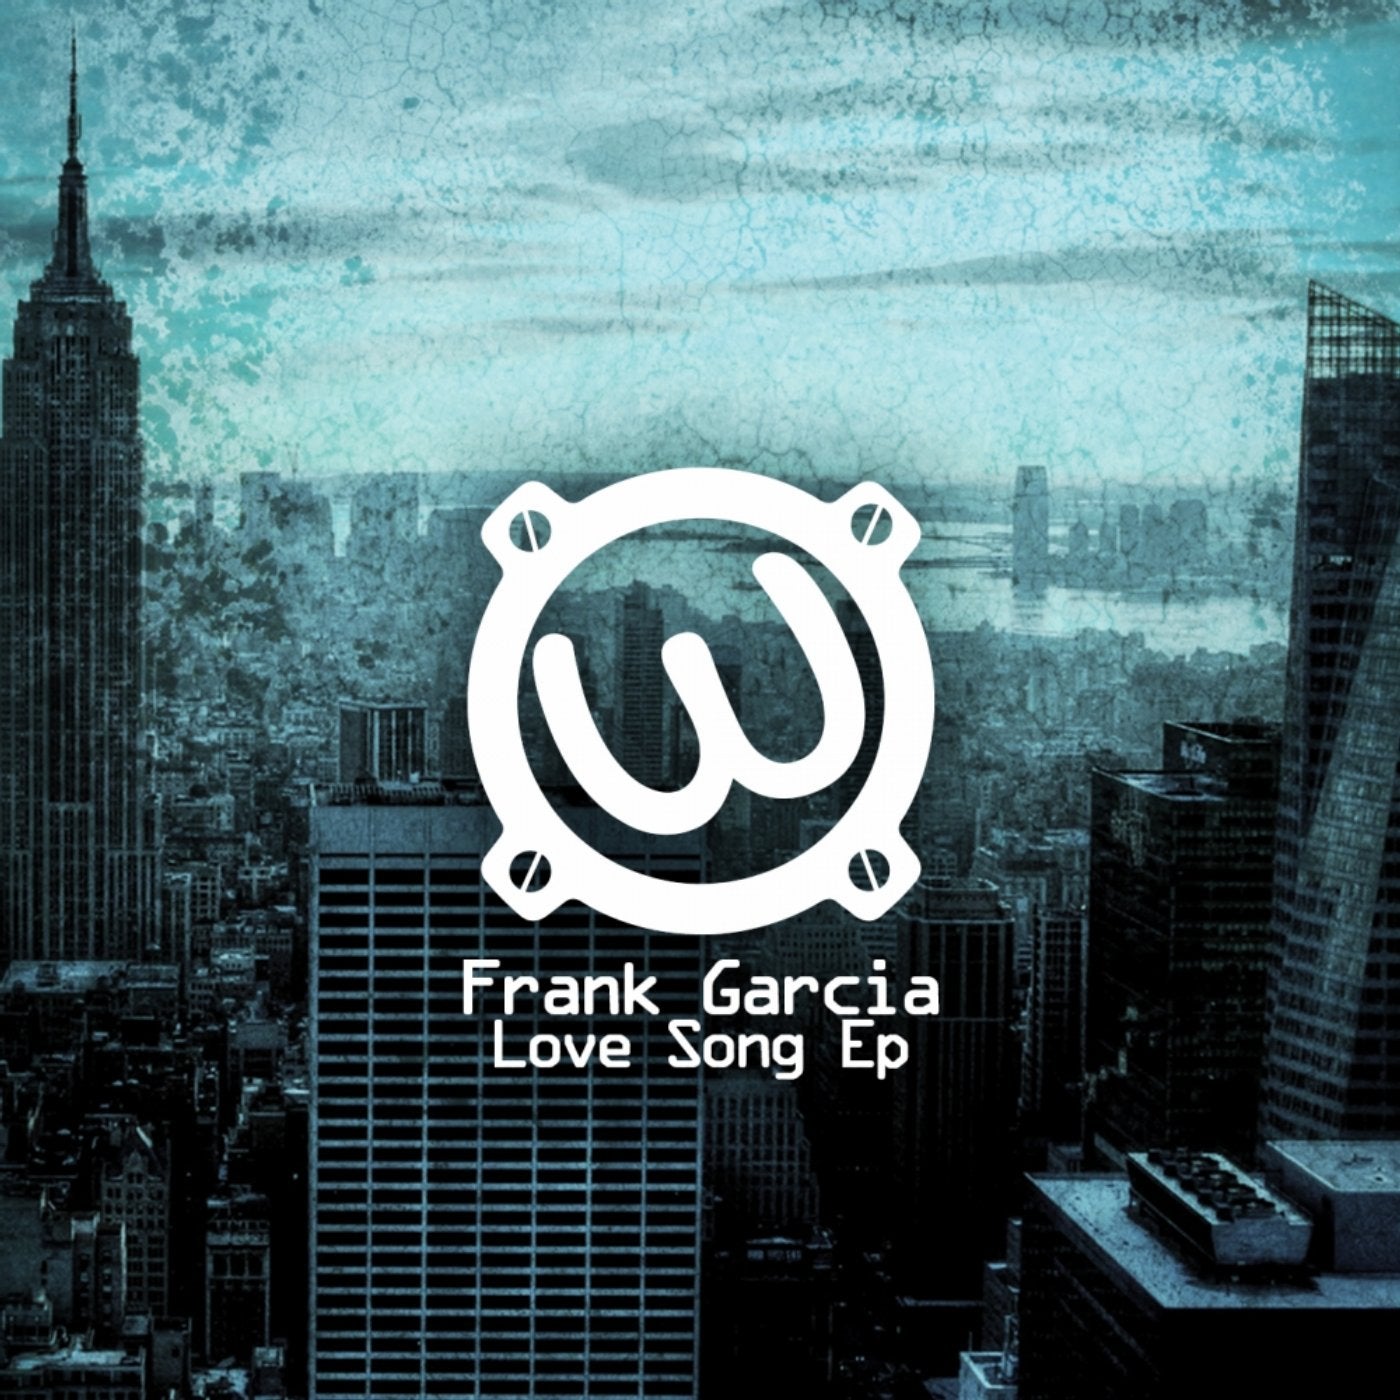 Love Song Ep